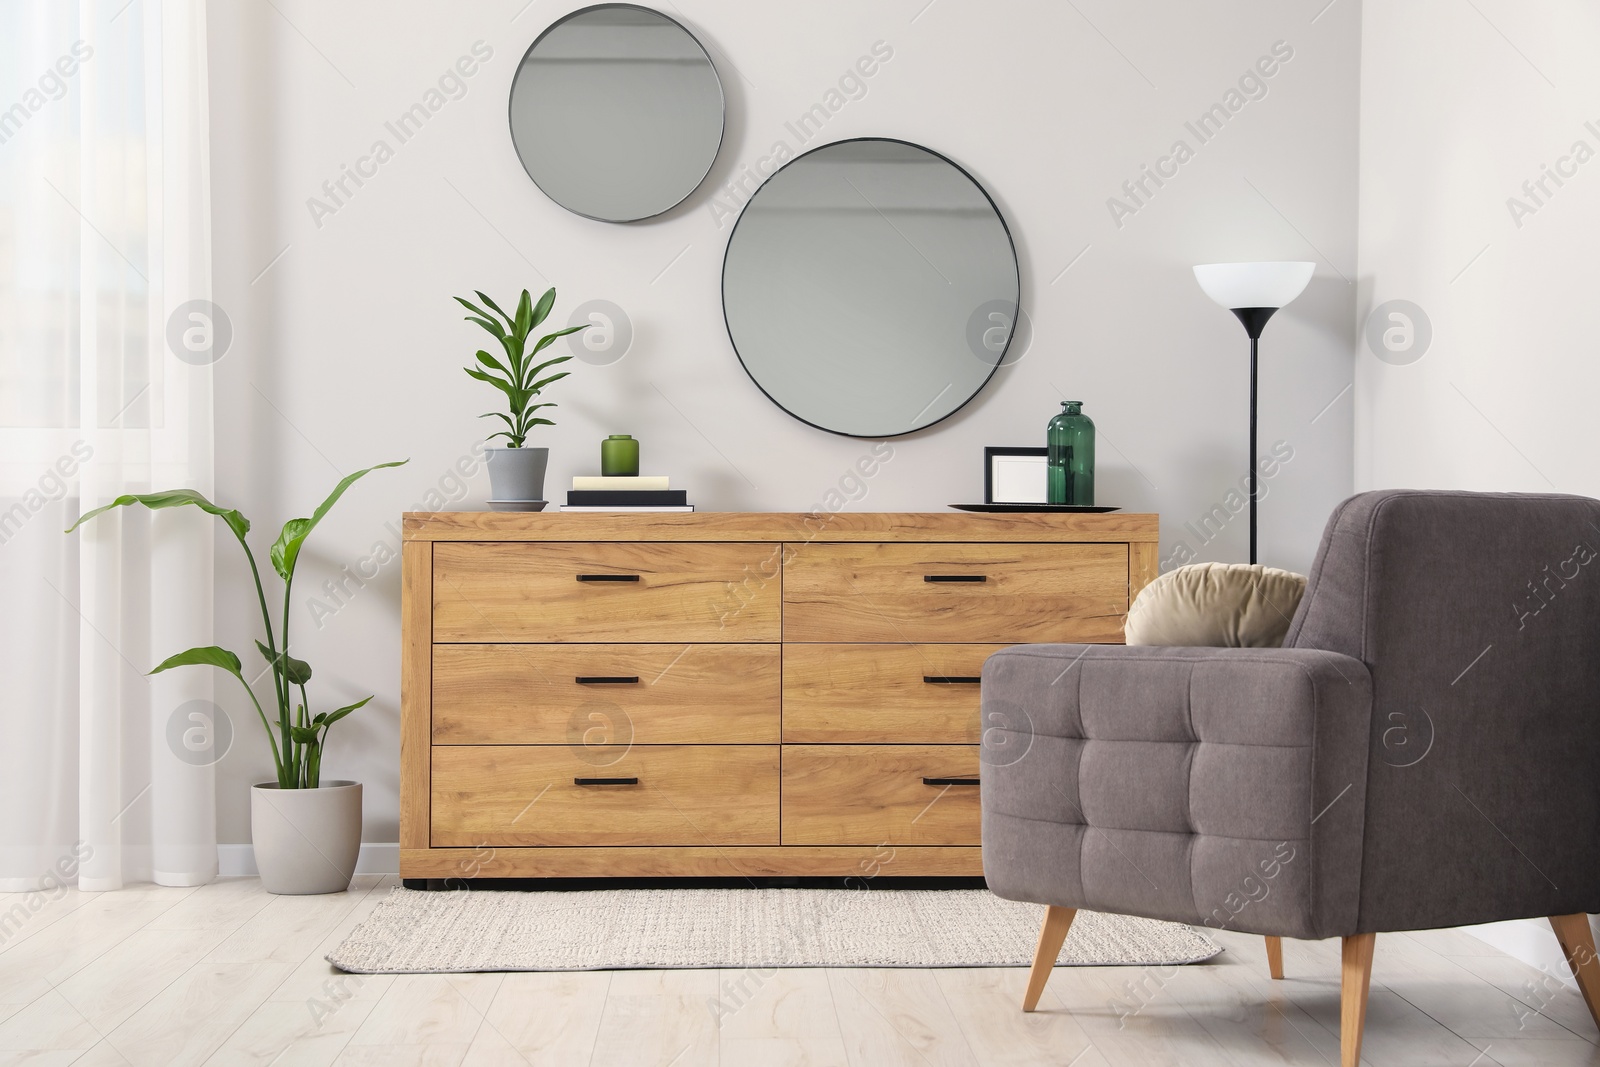 Photo of Cozy room interior with chest of drawers, mirrors, armchair and decor elements